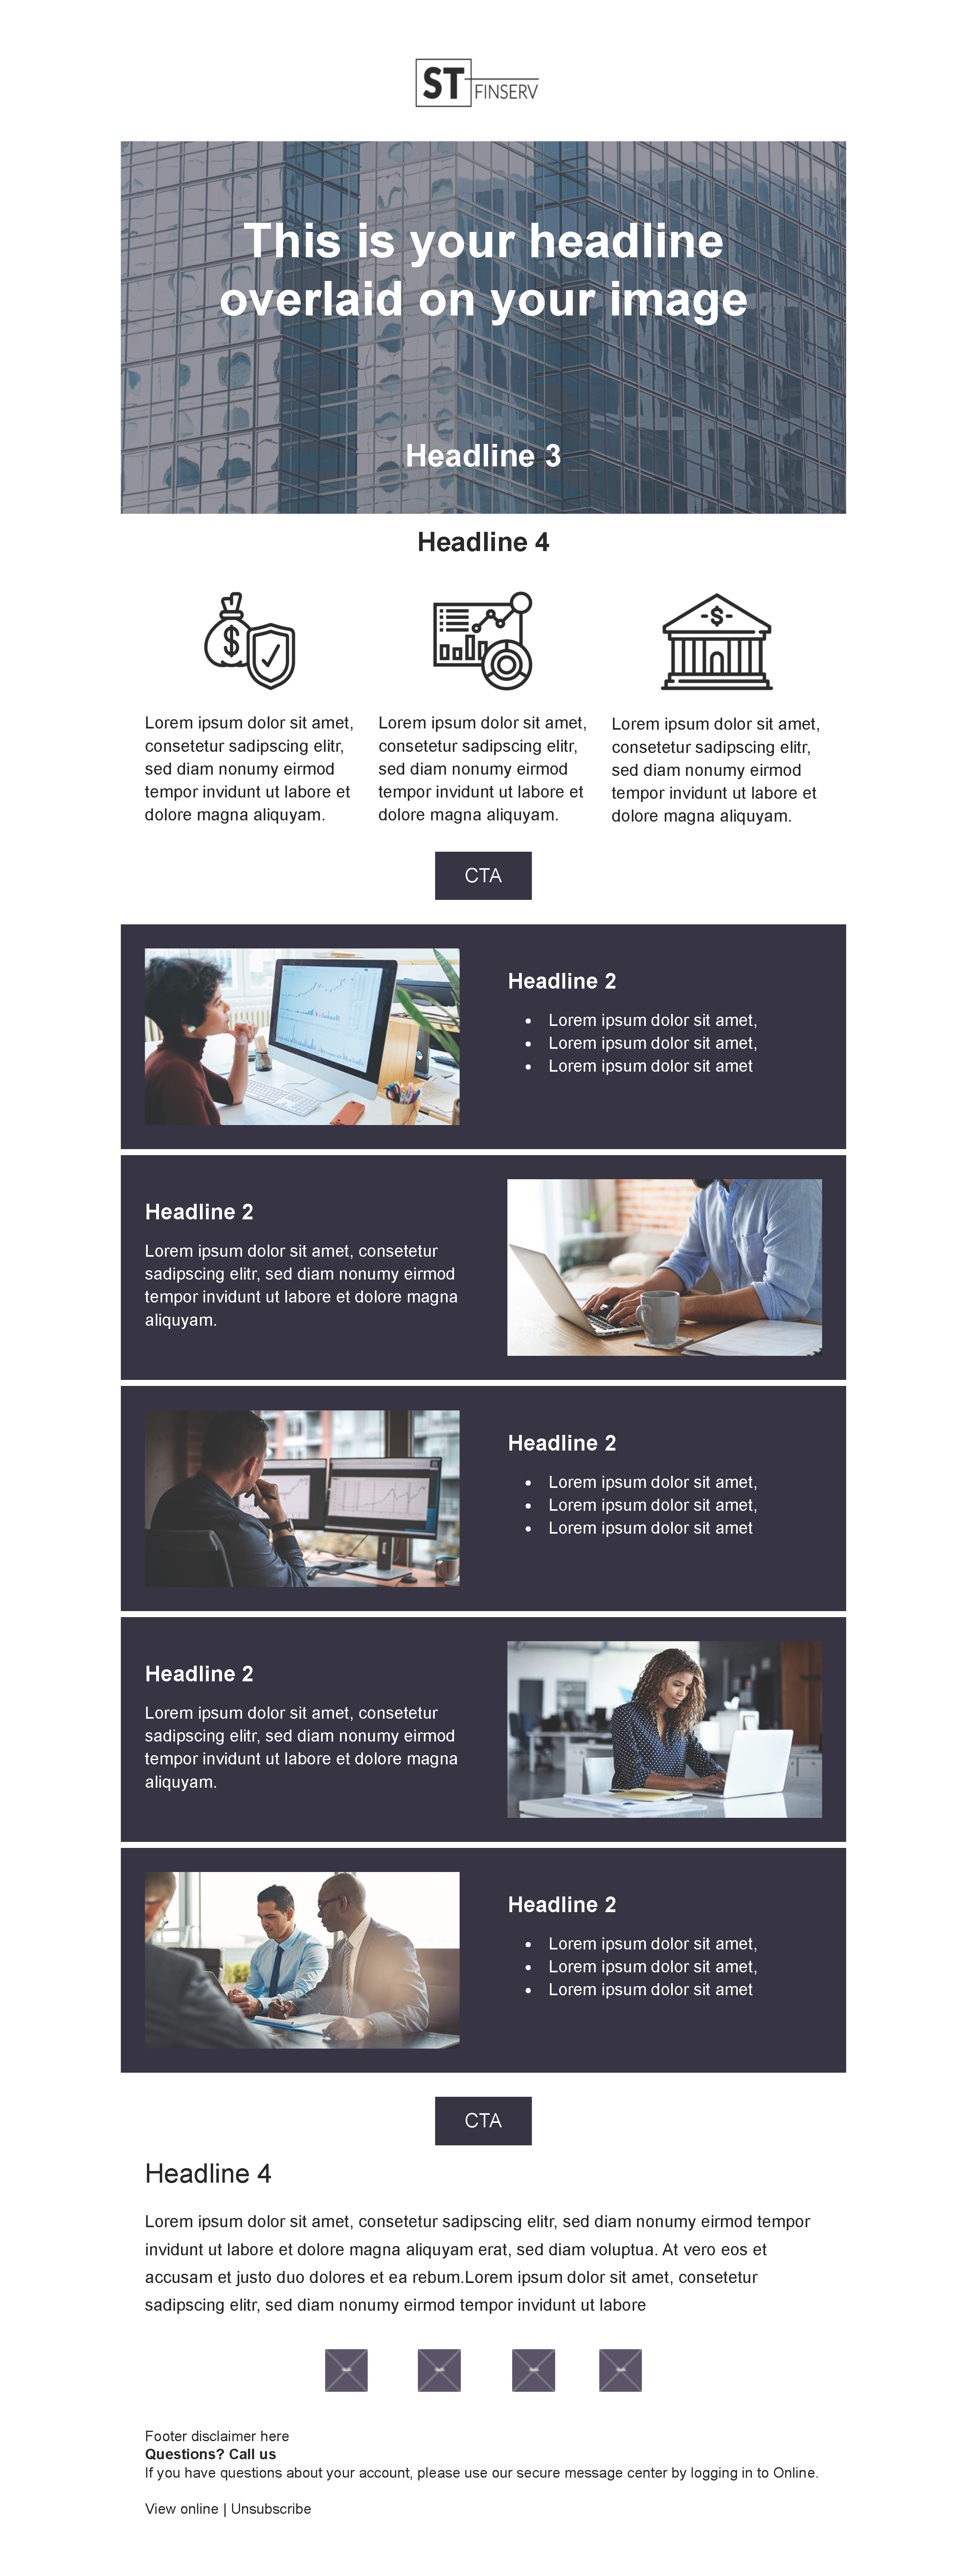 Email digest template 2 for highly regulated industries